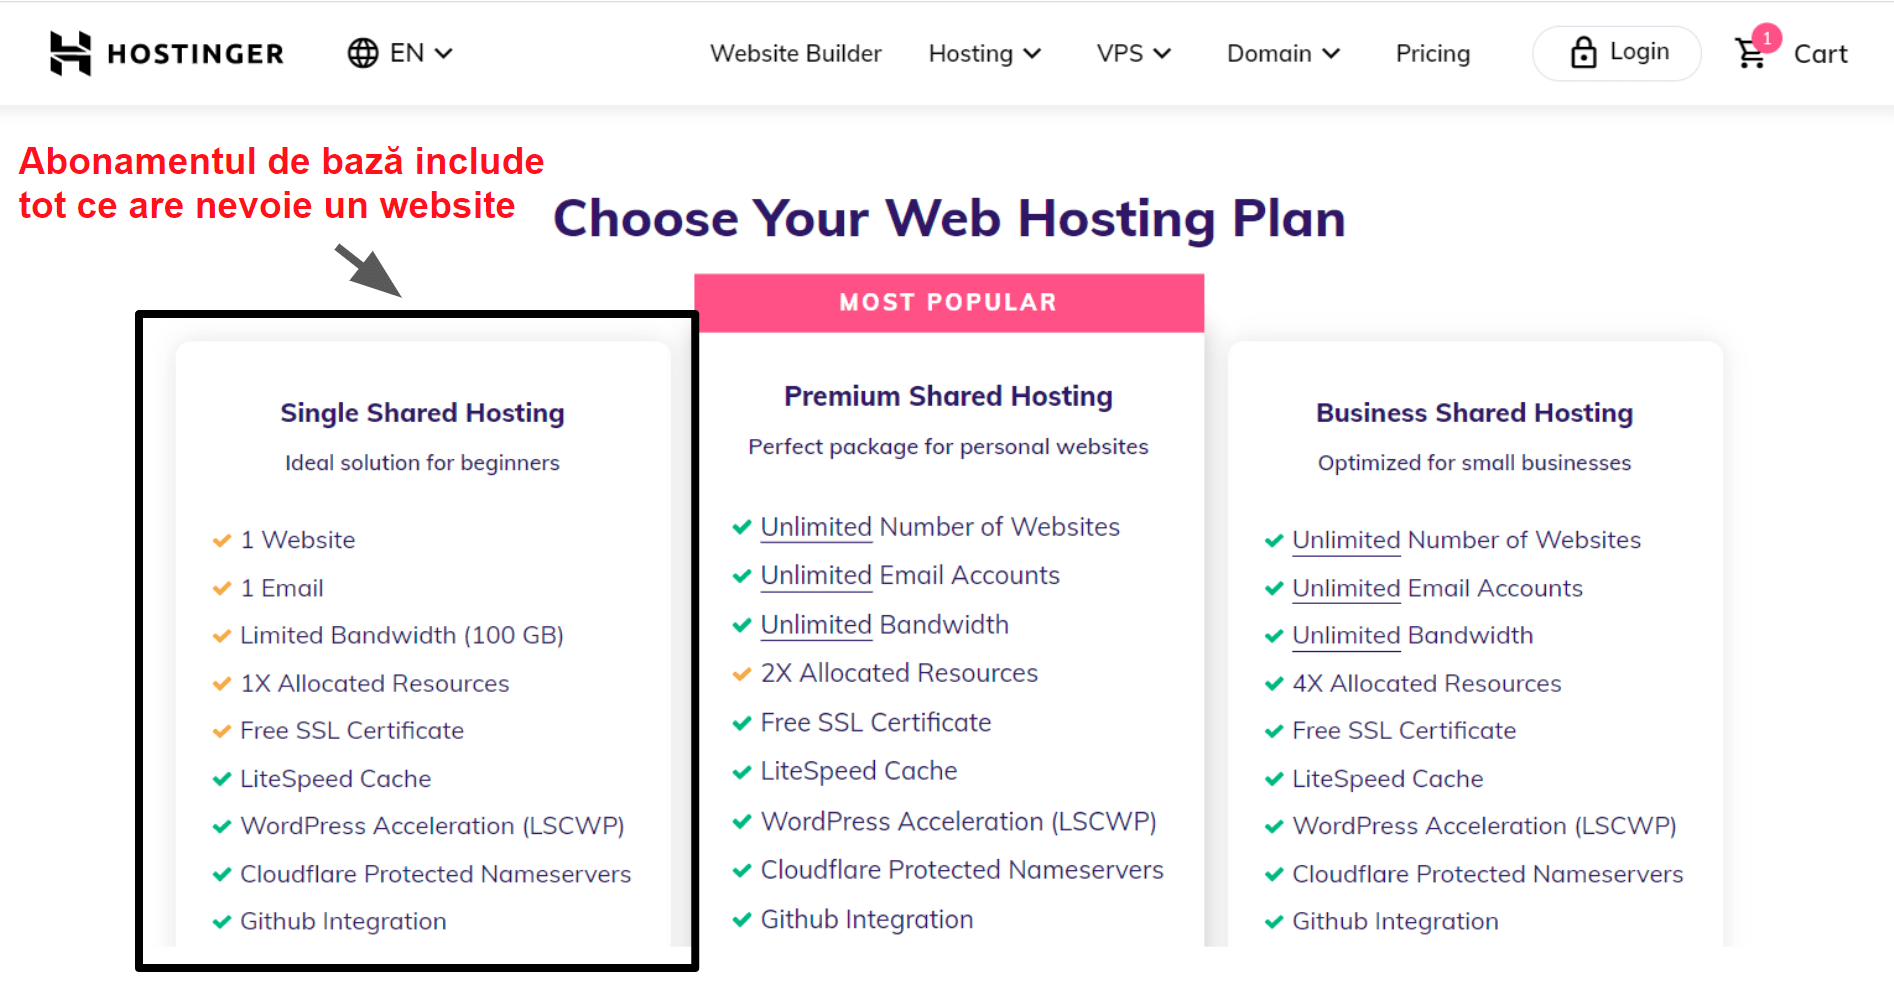 hosting plan features_RO